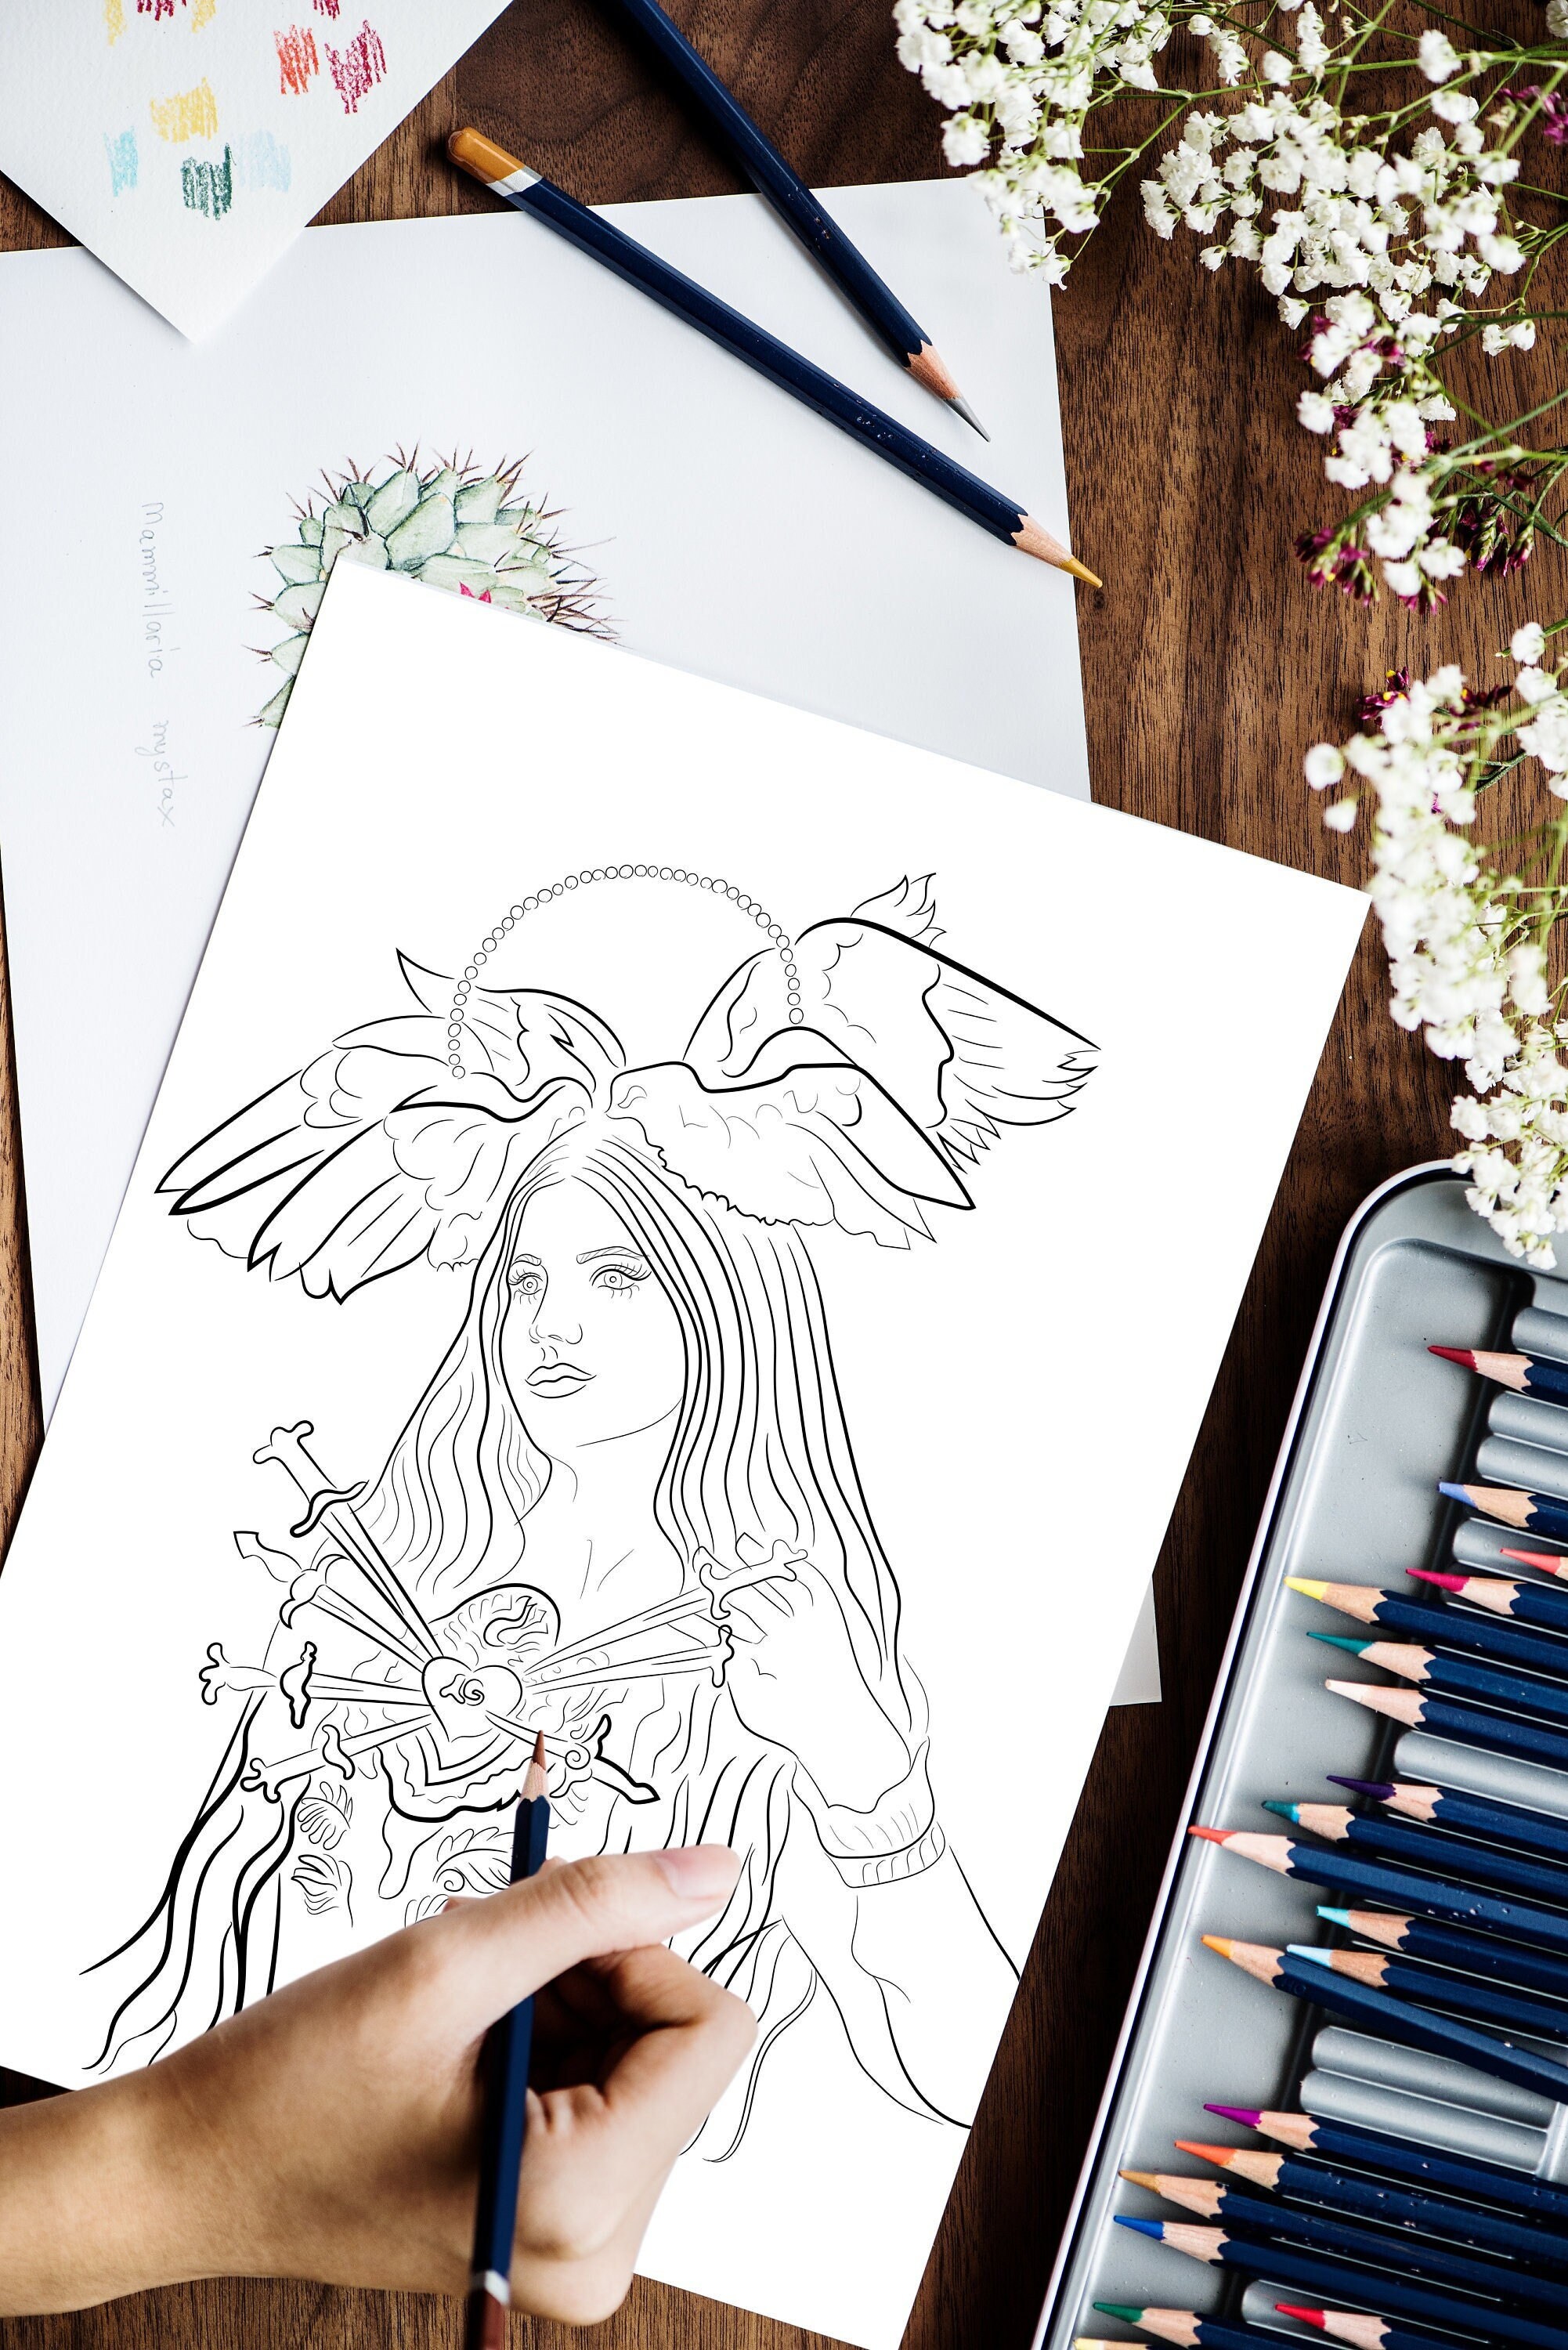 Lana del rey line art for coloring embroidery printable instant download